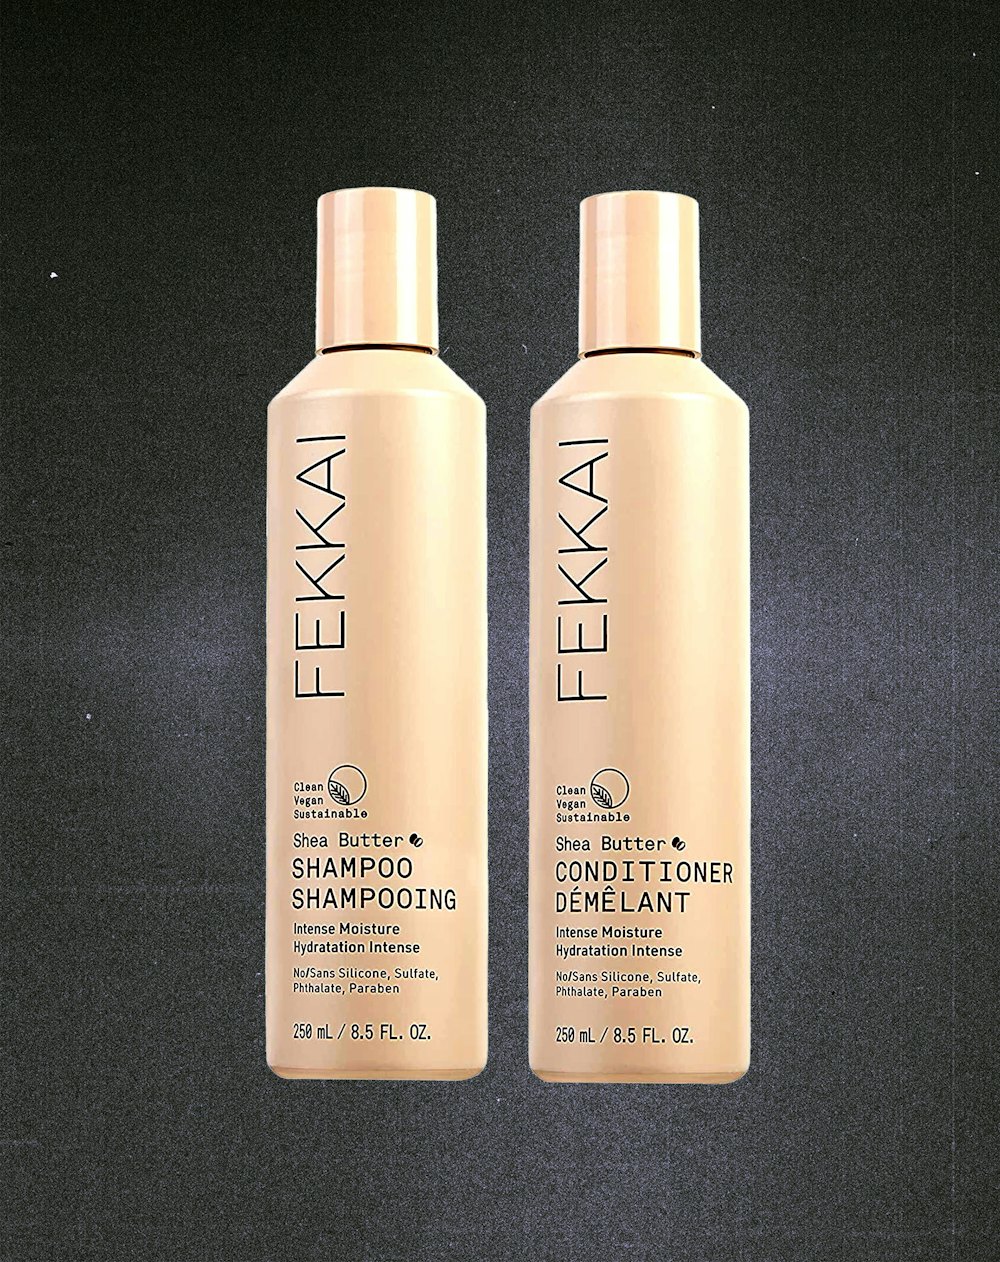 Shea Butter Shampoo and Conditioner